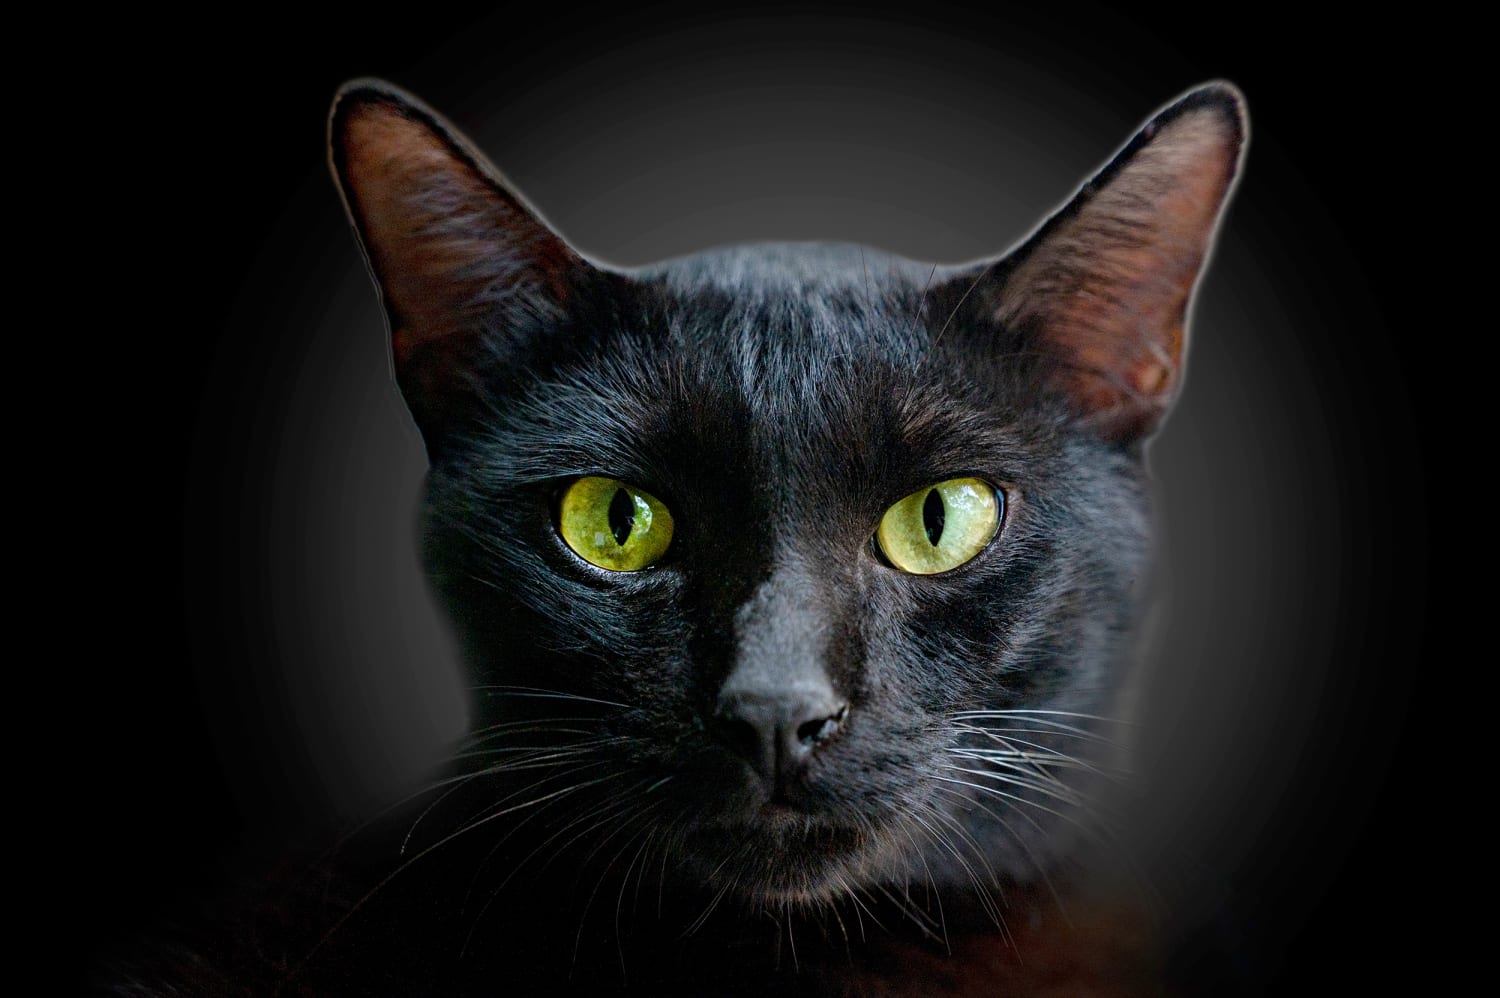 145 Black Cat Names for Males and Females - Good Names for Black Cats